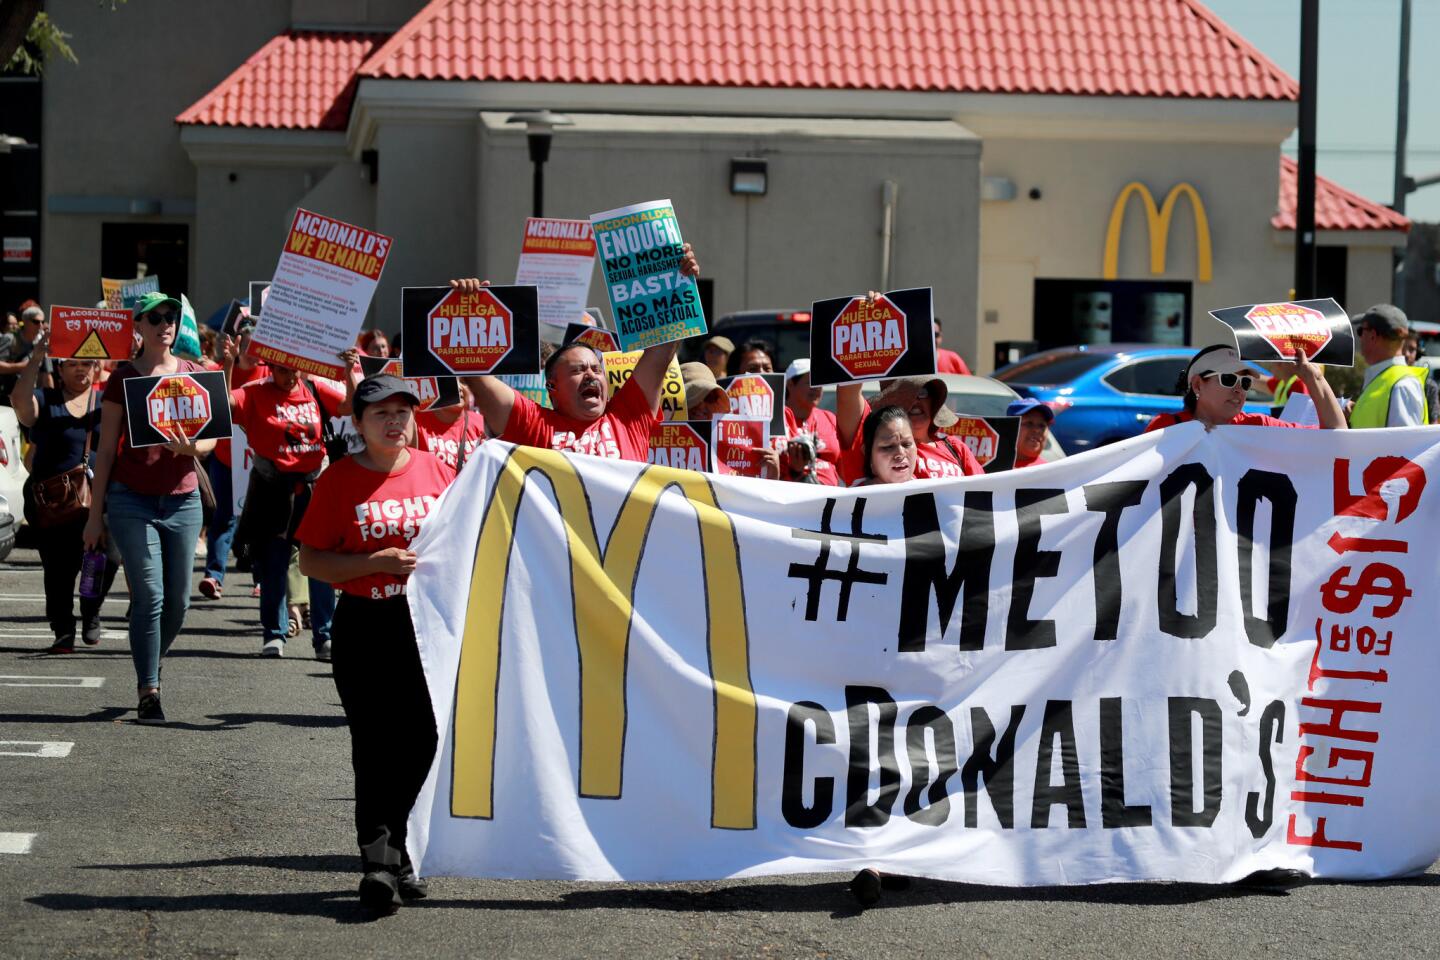 McDonald's workers, women's groups and civil rights groups stage a lunchtime strike at a South Los Angeles McDonald's to spotlight alleged sexual harassment throughout the fast-food giant's organizational culture as part of a 10-city protest.